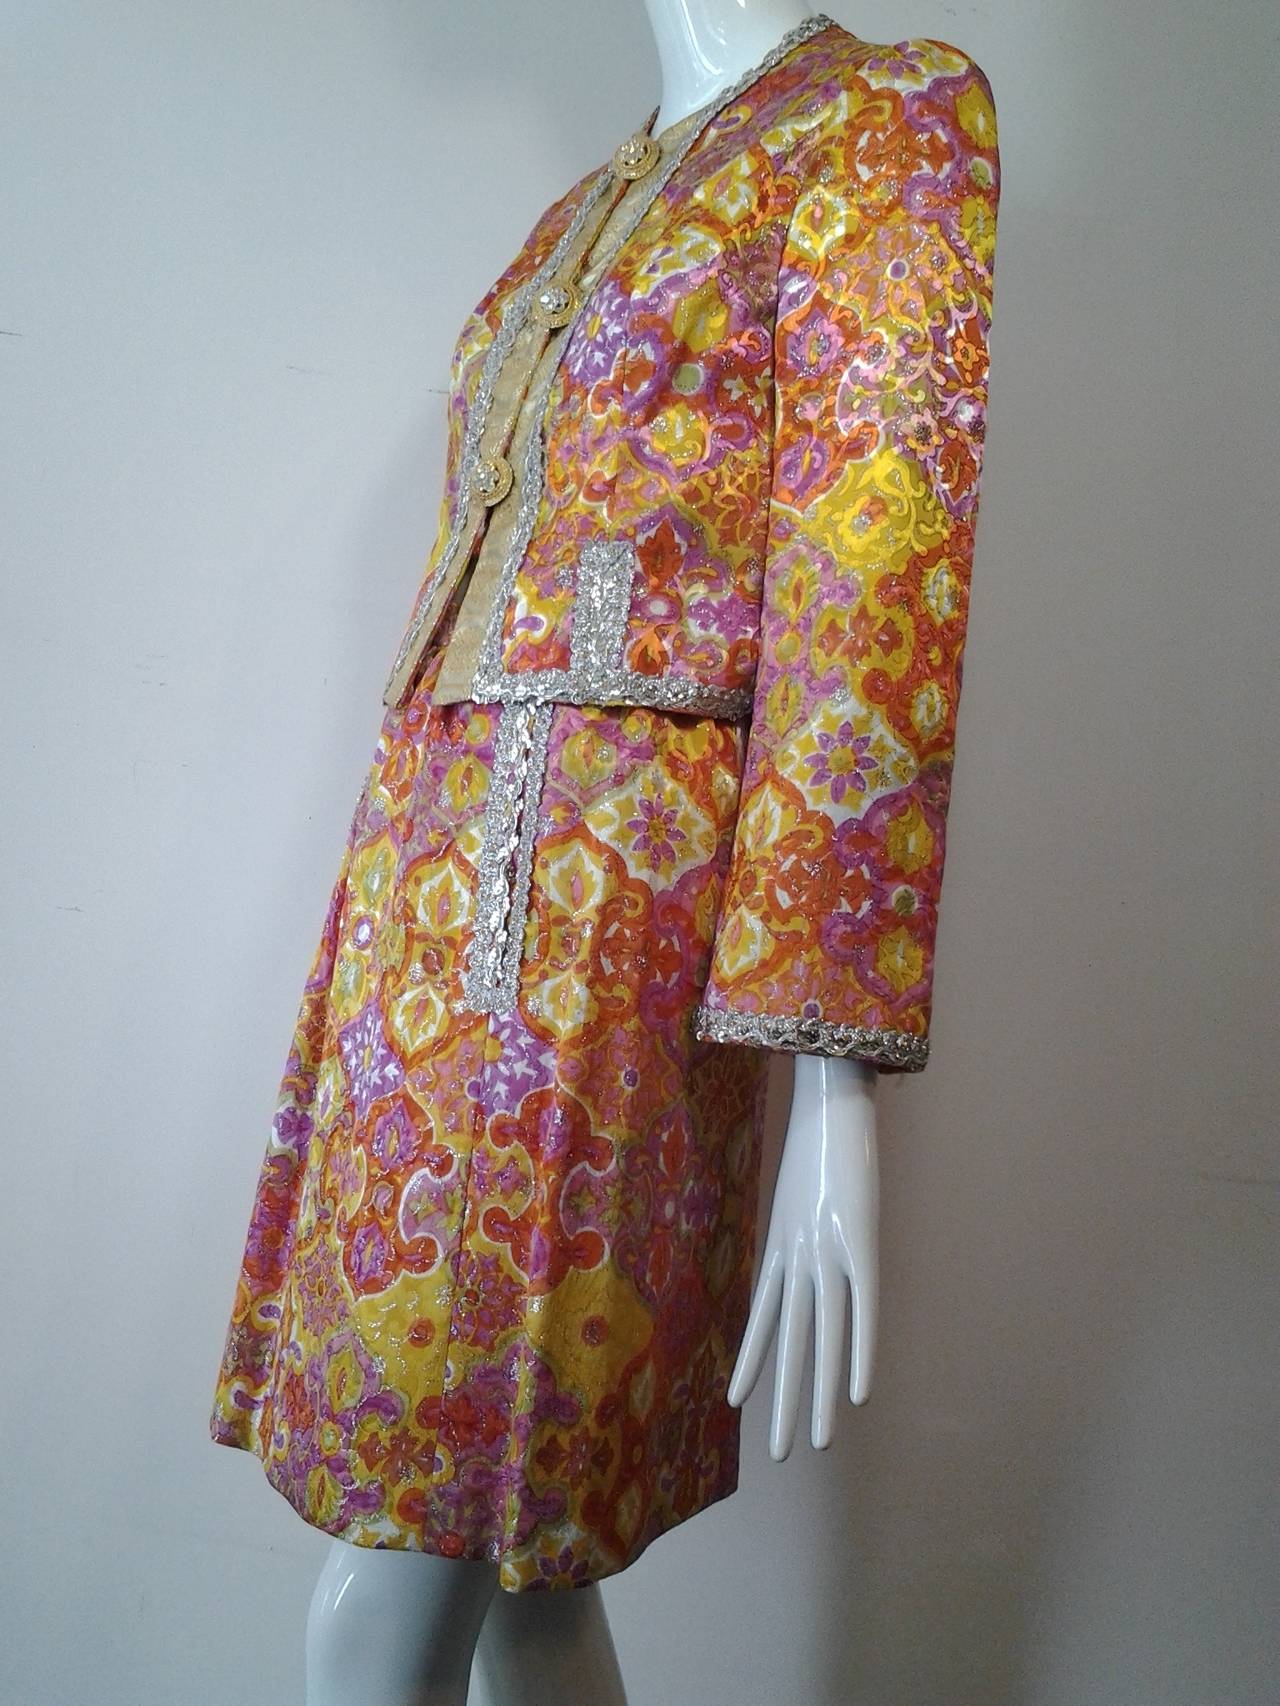 1960s Fern Violette lame floral brocade cocktail suit w/ metallic braid trim and large jeweled buttons at front and cuffs. Silk lined. Pockets at skirt front.